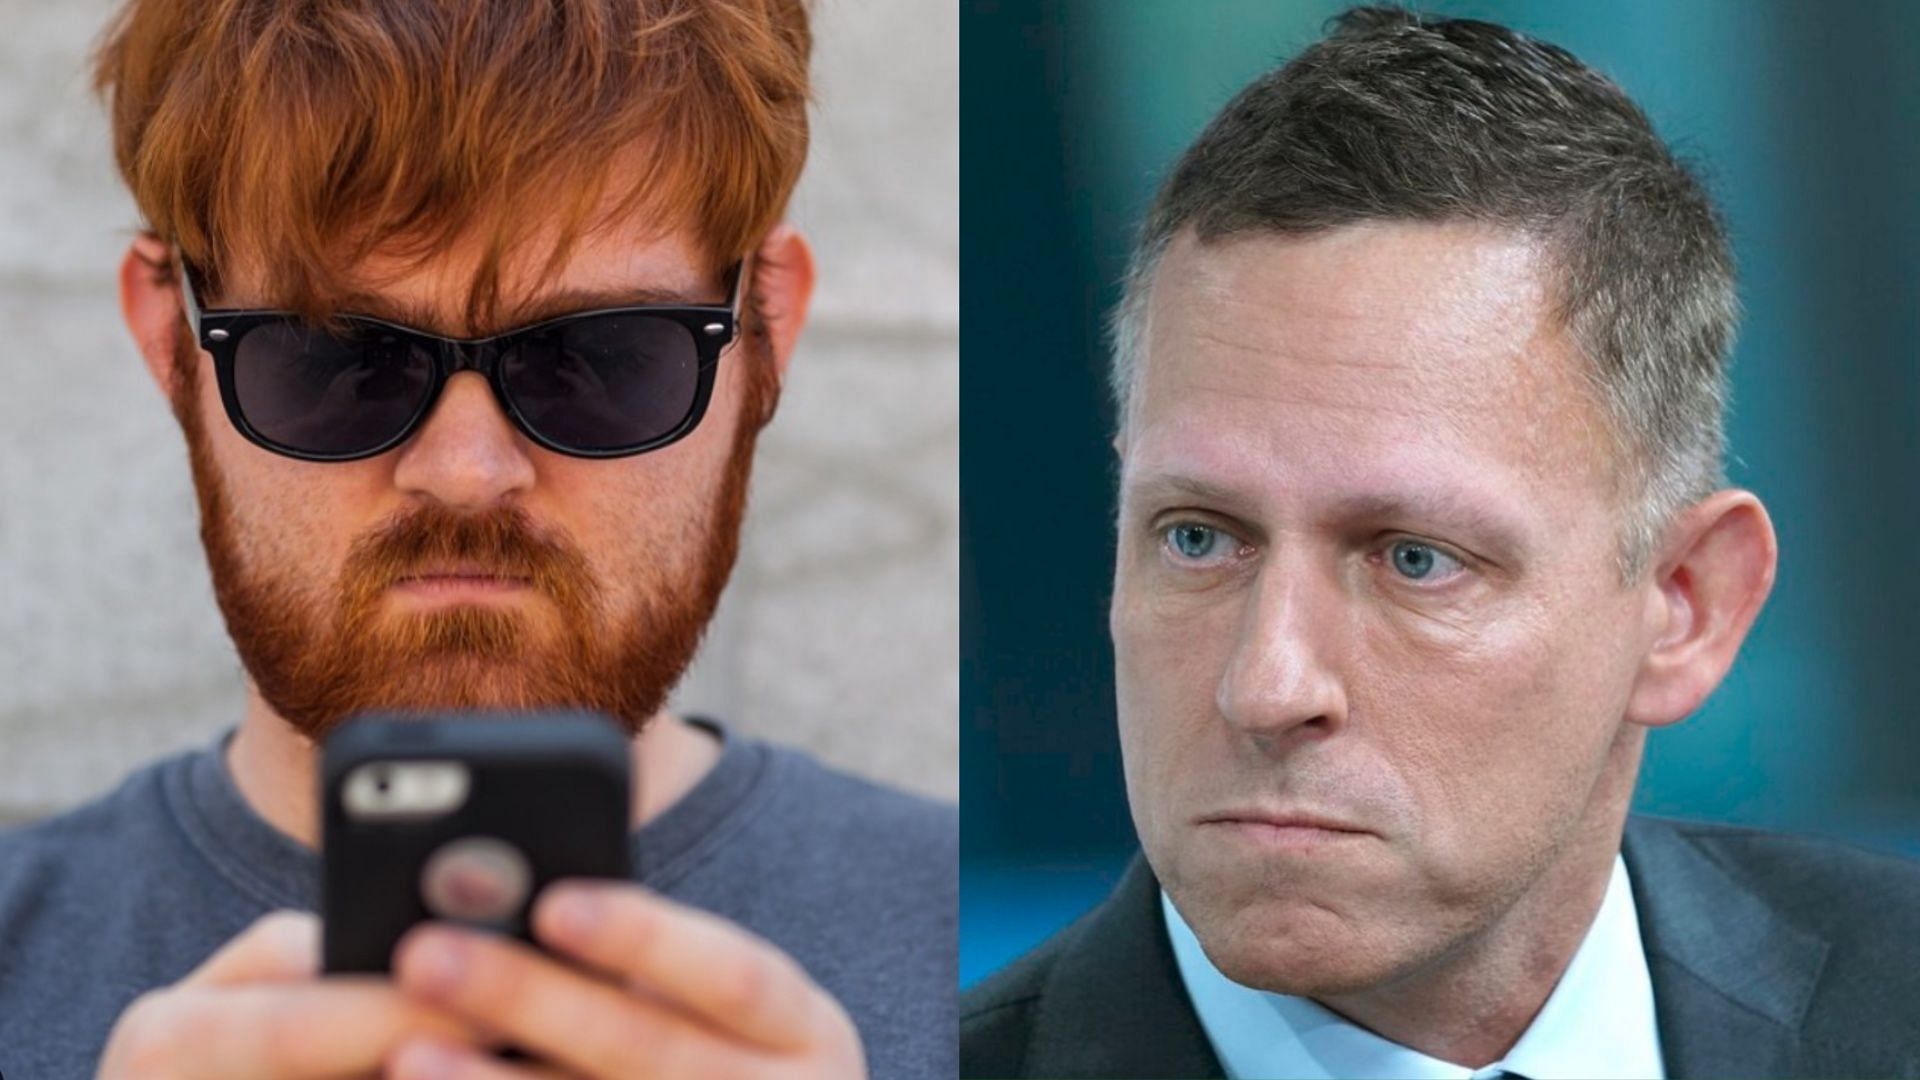 Tech mogul Peter Thiel has been outed by Charles Johnson as an FBI informant. (Image via Instagram/@chuckcjohnson, X/@ThomasPaineBand)